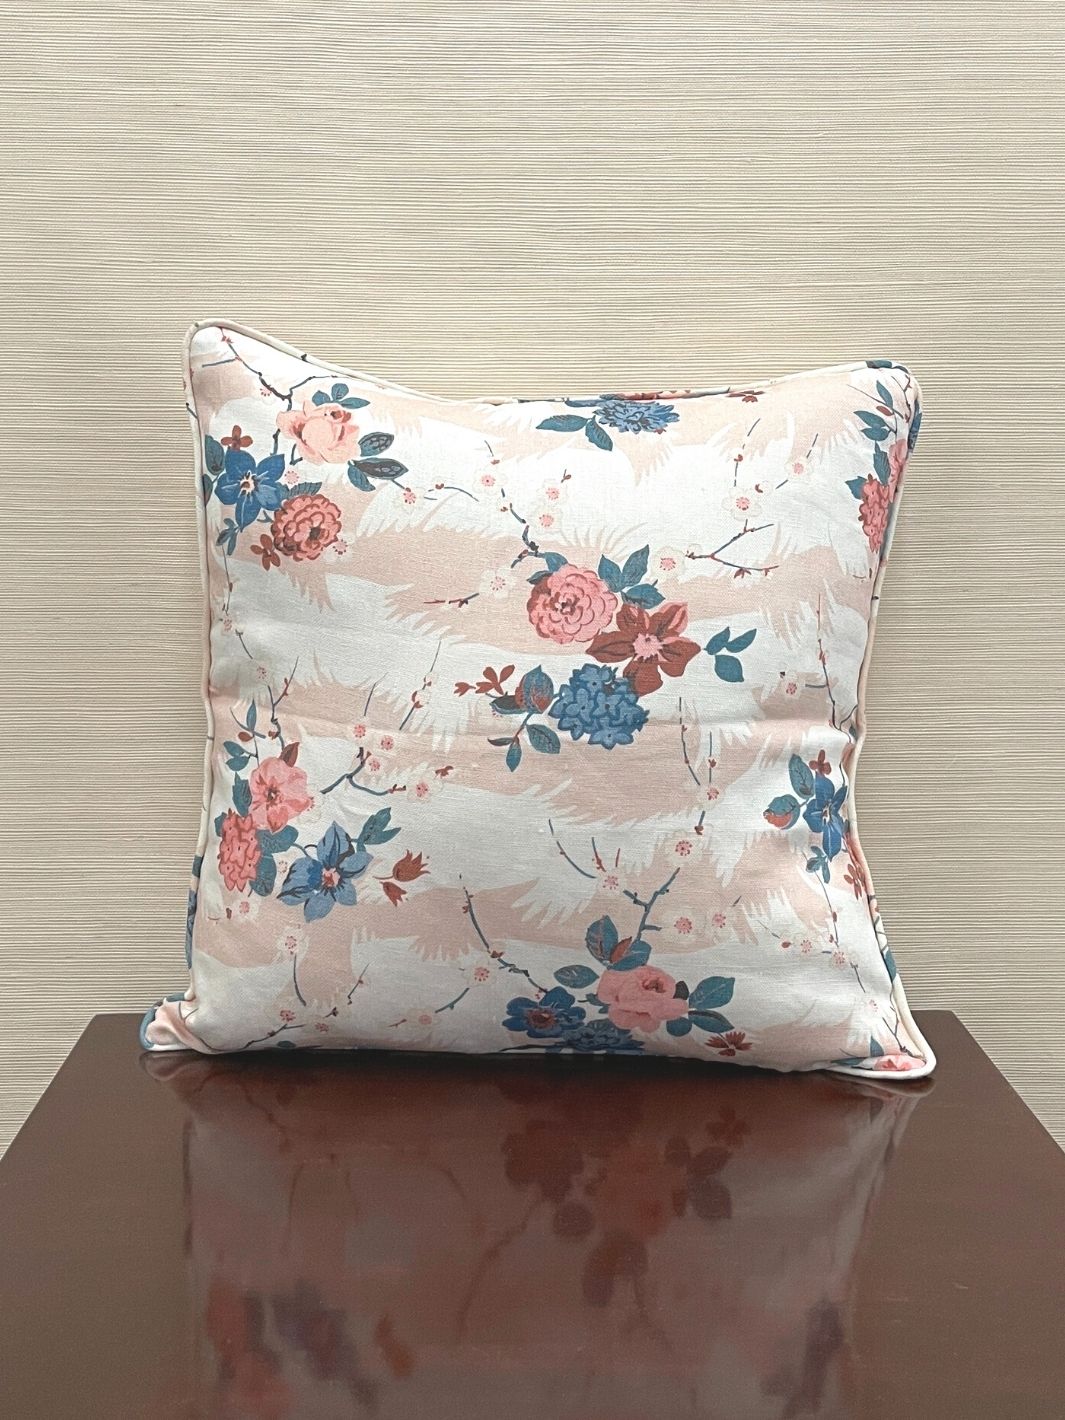 'Dora Chintz' Throw Pillow by Nathan Turner 18x18 - Pink + Blue on Linen